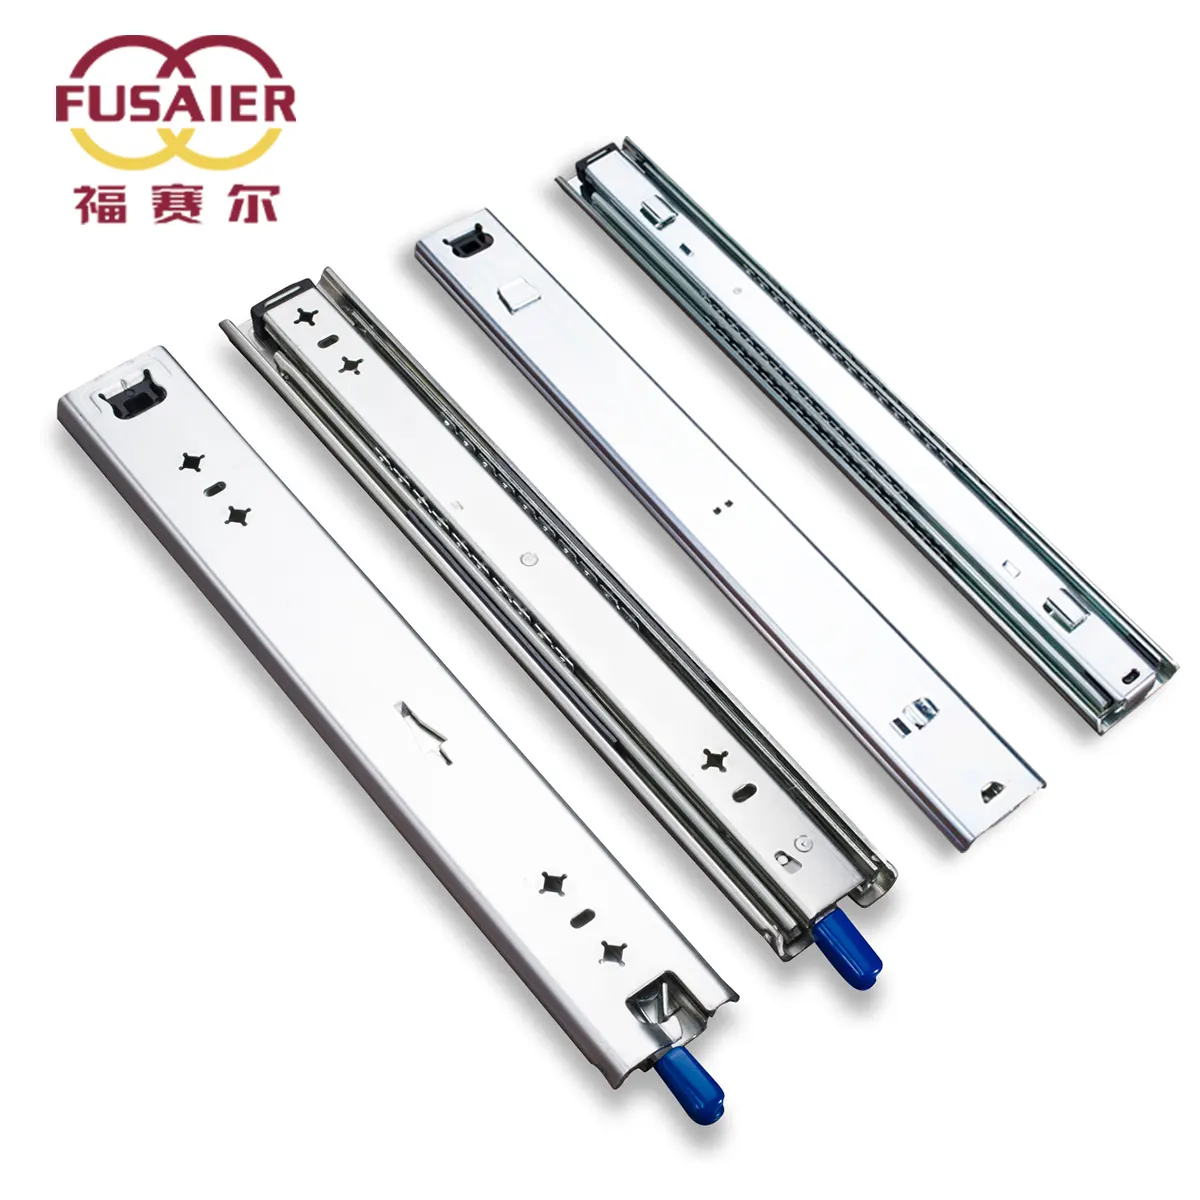 53mm Soft Closing With bayonet lock handle Heavy Duty Telescopic Channel Kitchen Cabinet Tool Box Drawer Slides rail